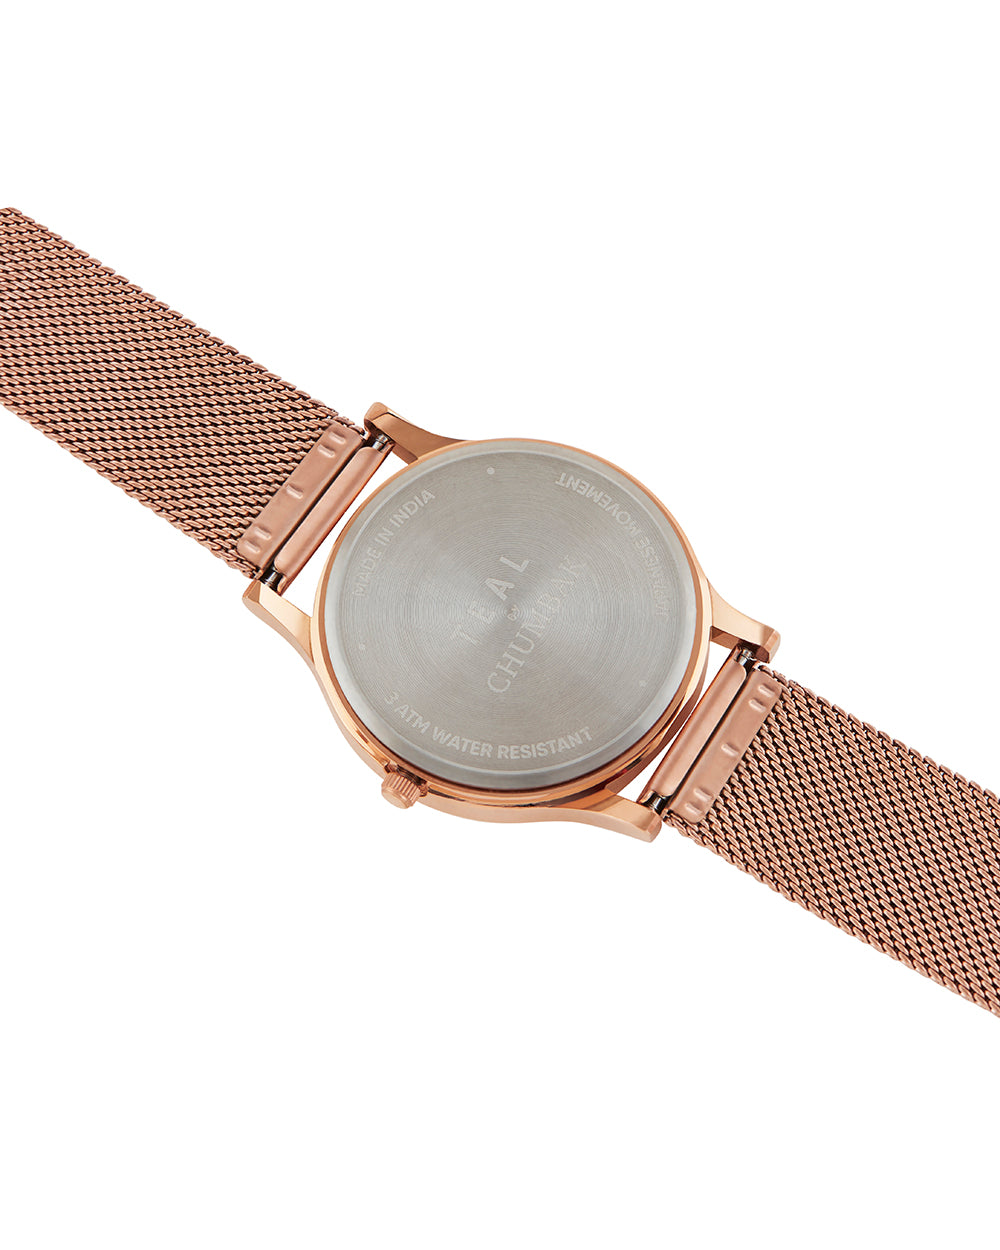 Teal by Chumbak Daily Hustle Watch,Stainless Steel Mesh Strap